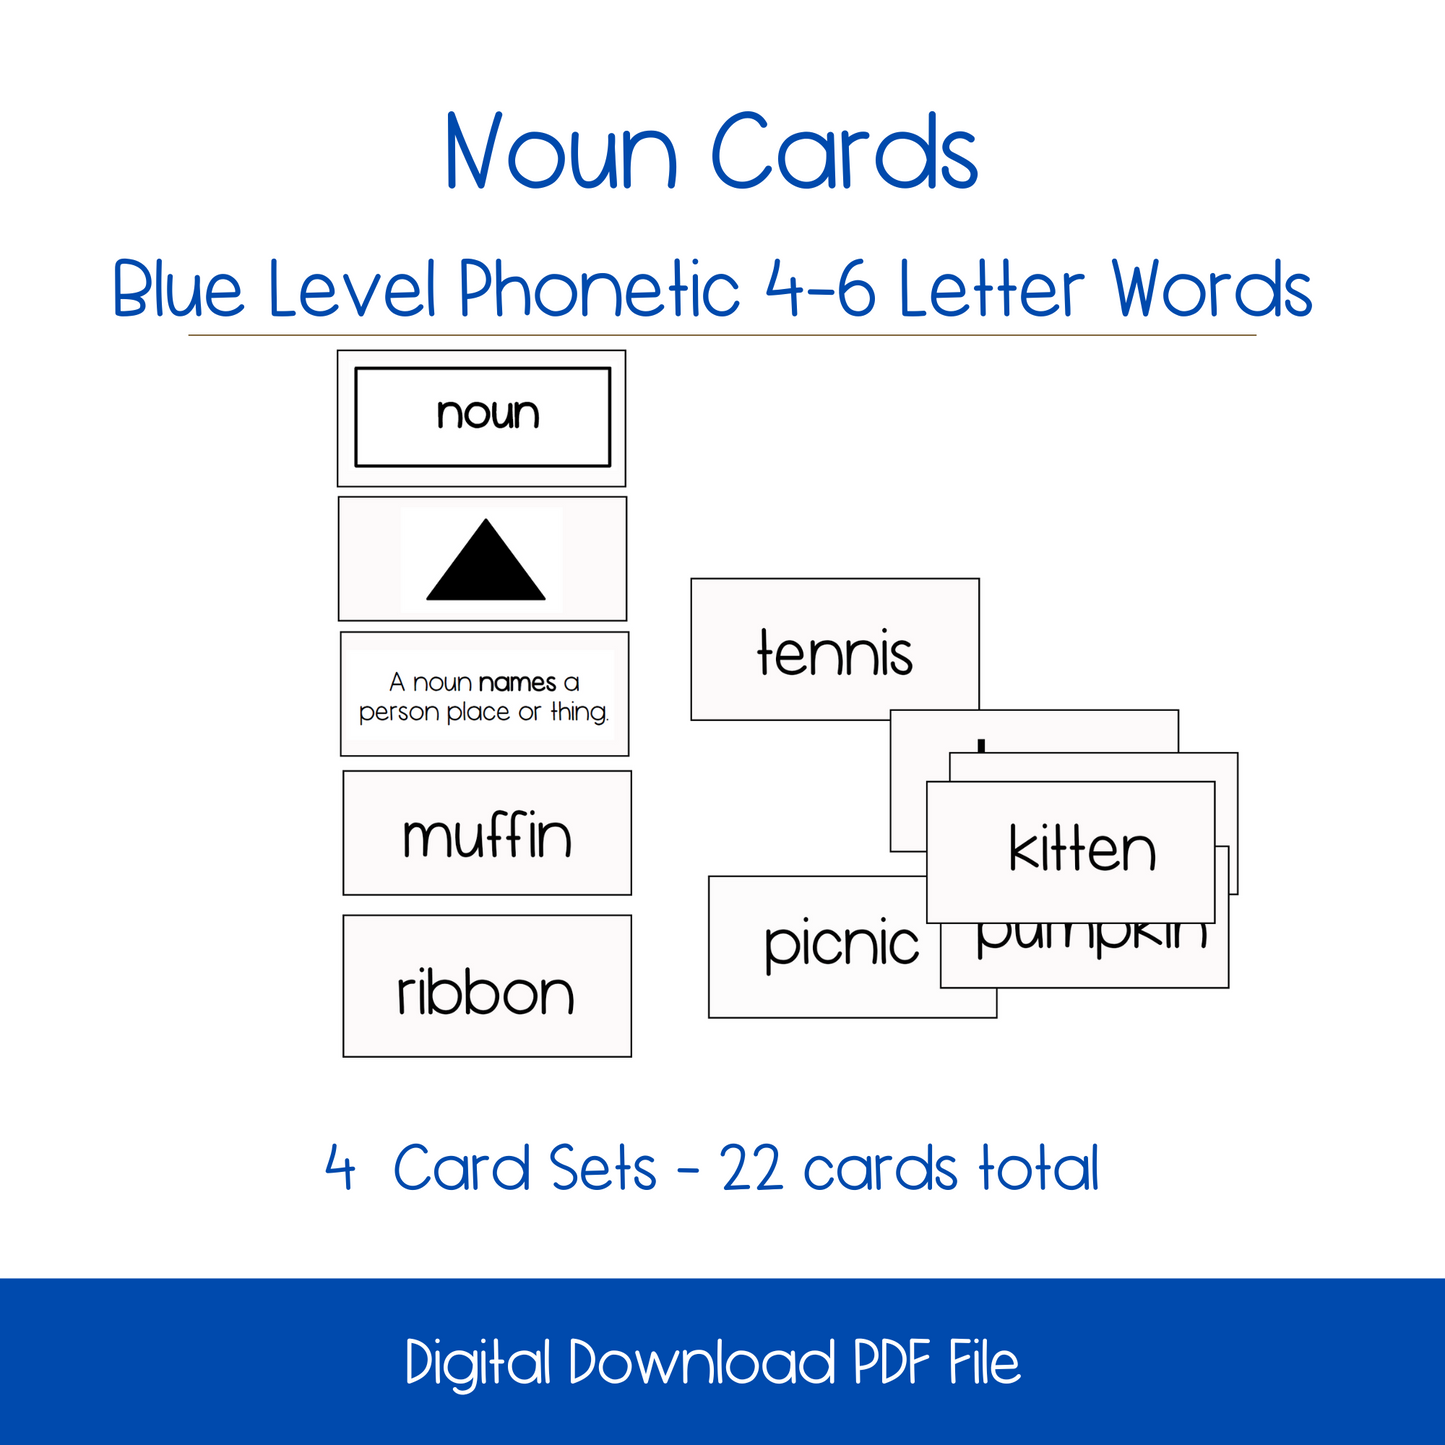 Phonetic Noun Cards - Blue Level  (4 sets in Activity)